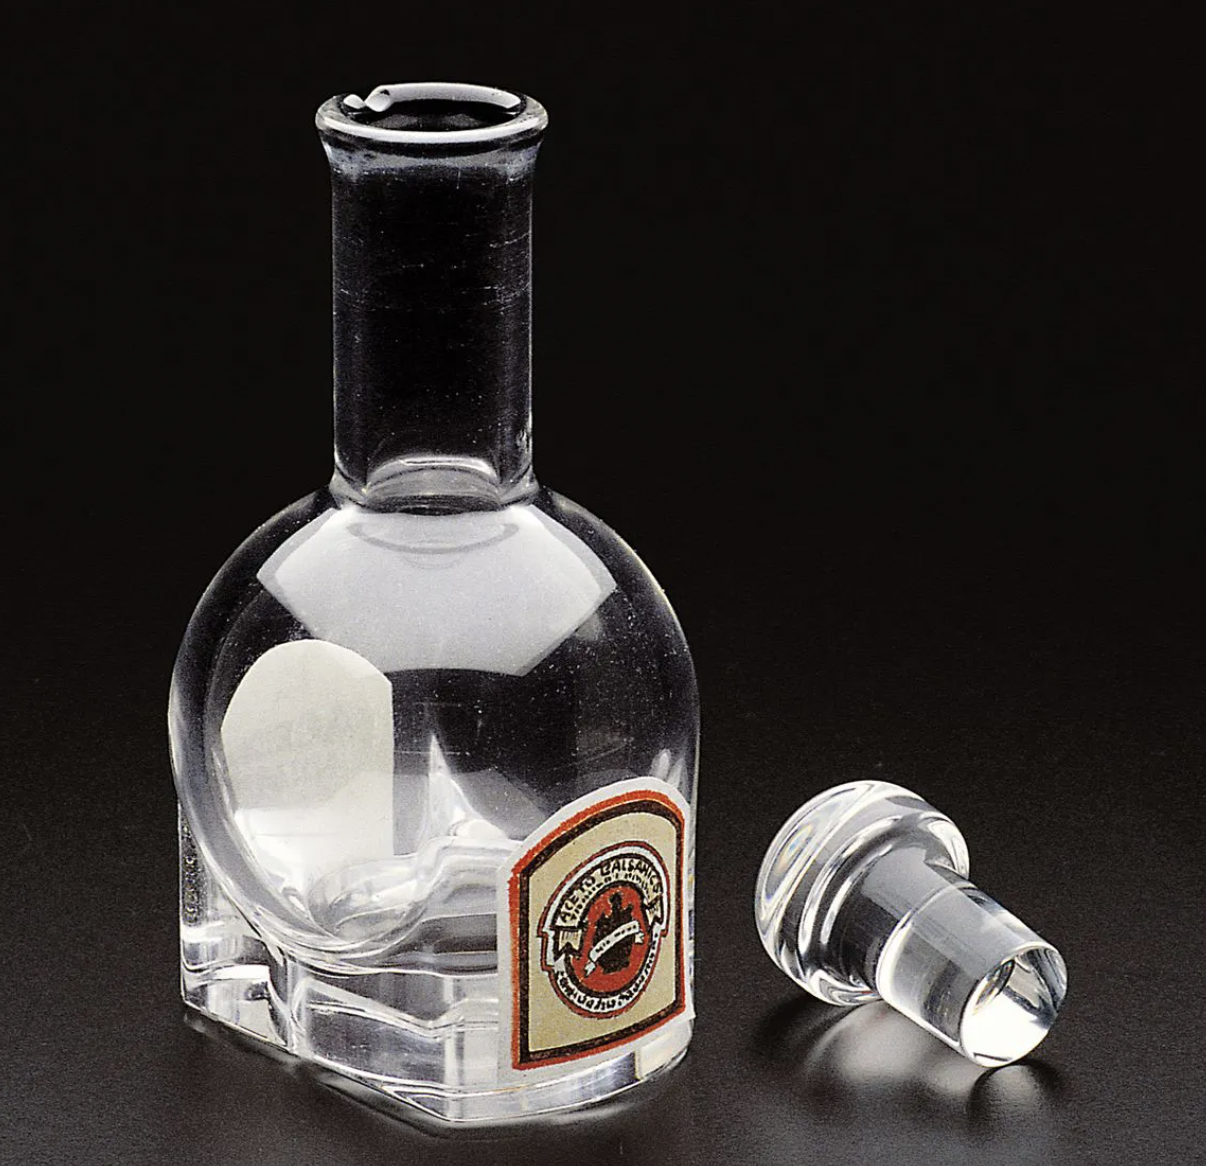 Standard size and shape for DOP bottle